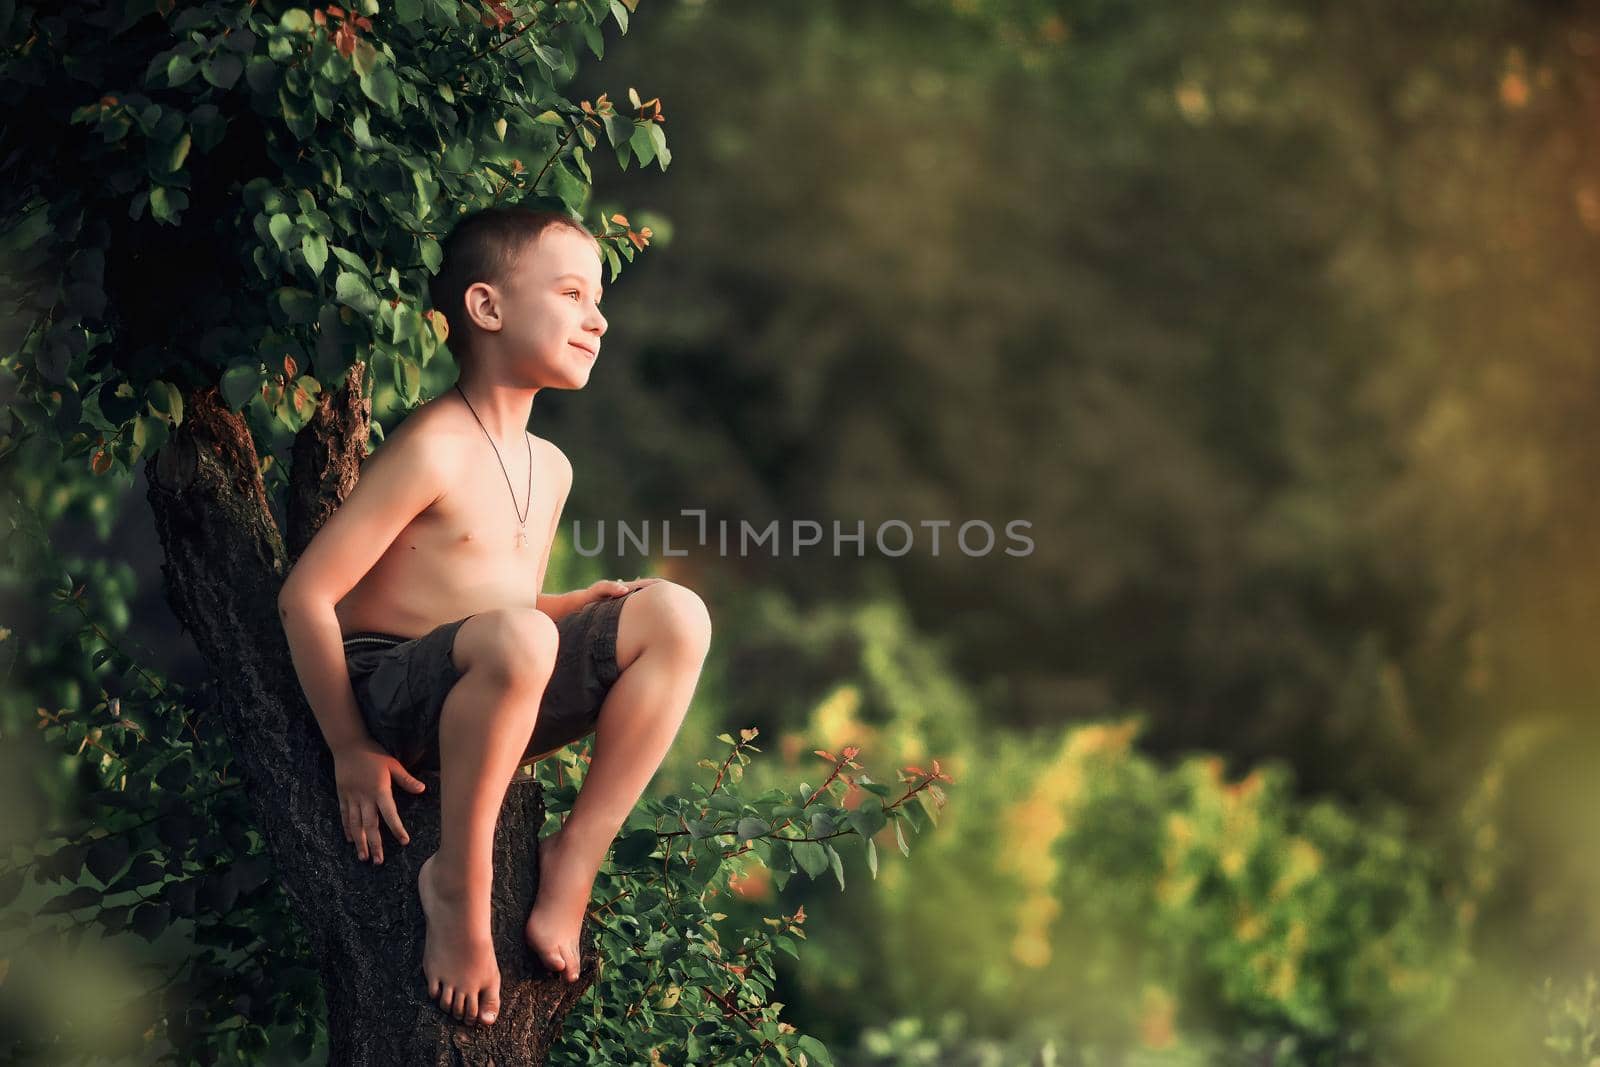 A boy without a shirt sits on a partially felled tree in the village. Against the background of green foliage. on a warm summer day.